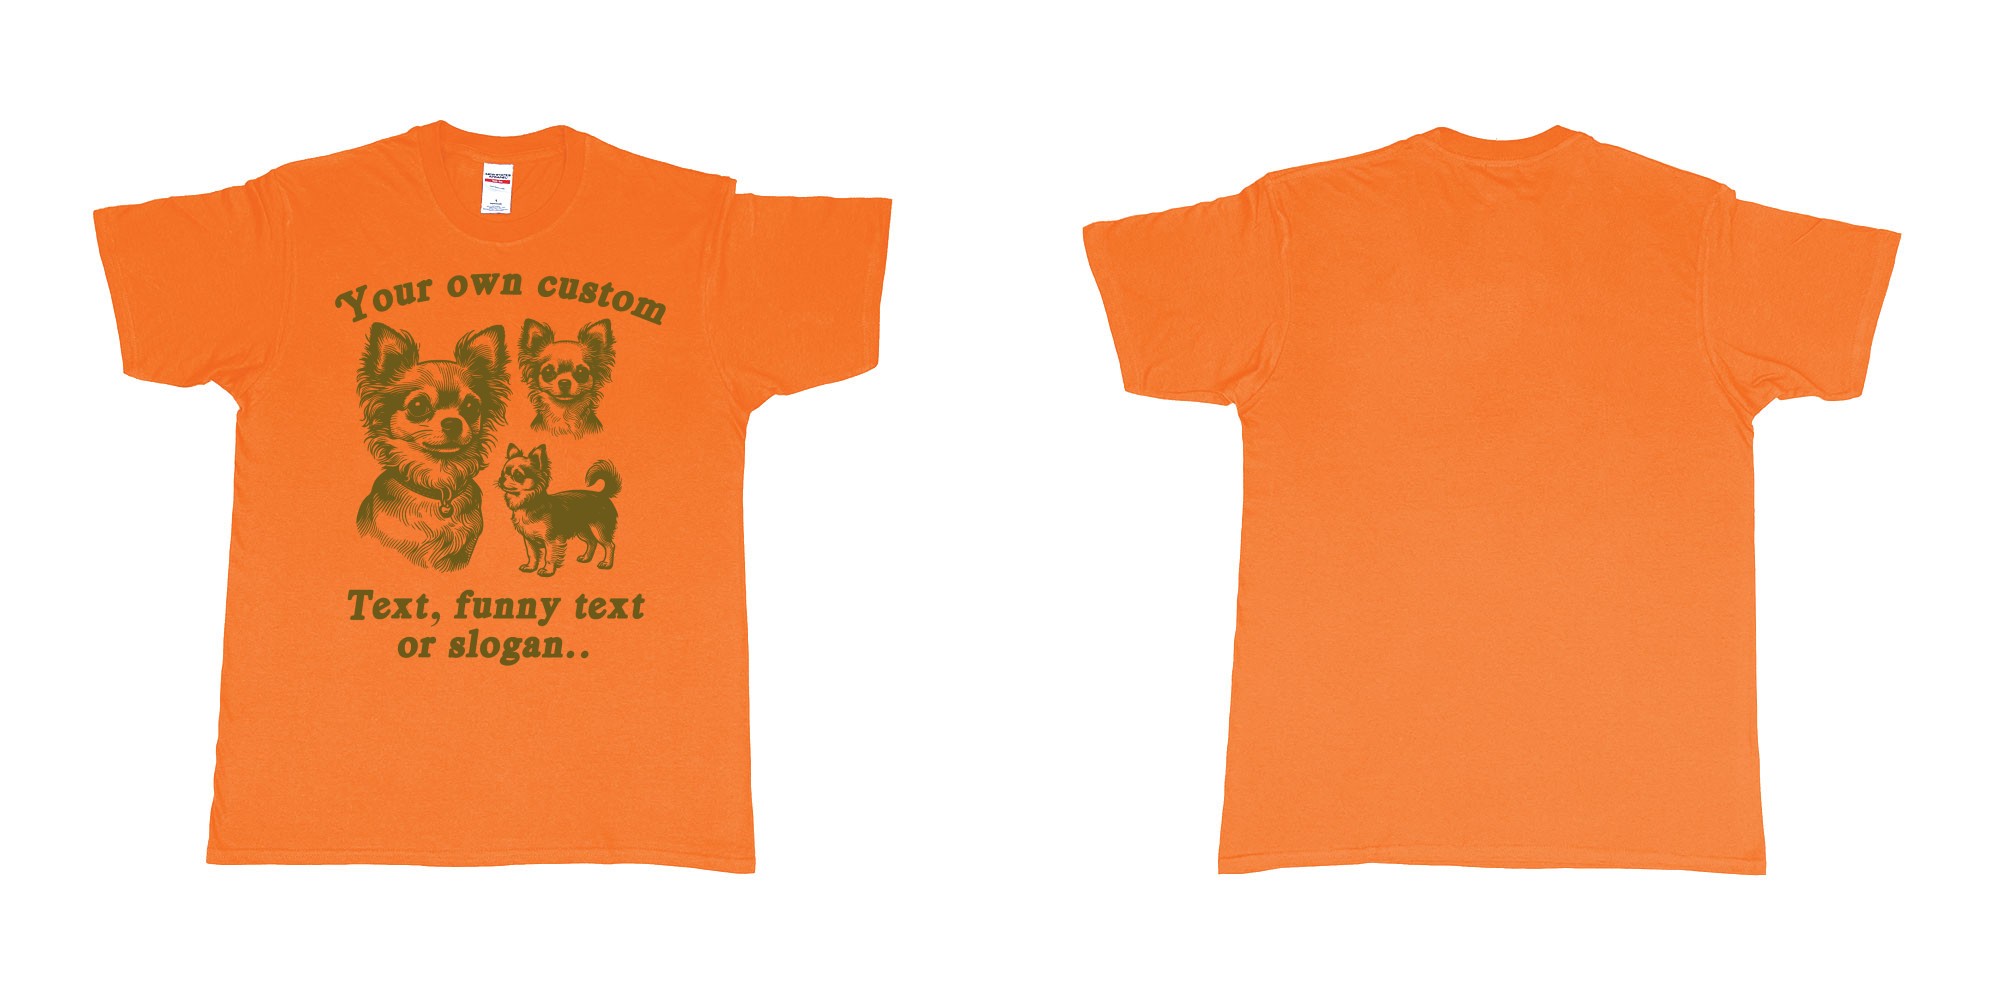 Custom tshirt design chiwawa dogs drawing custom own text printing in fabric color orange choice your own text made in Bali by The Pirate Way